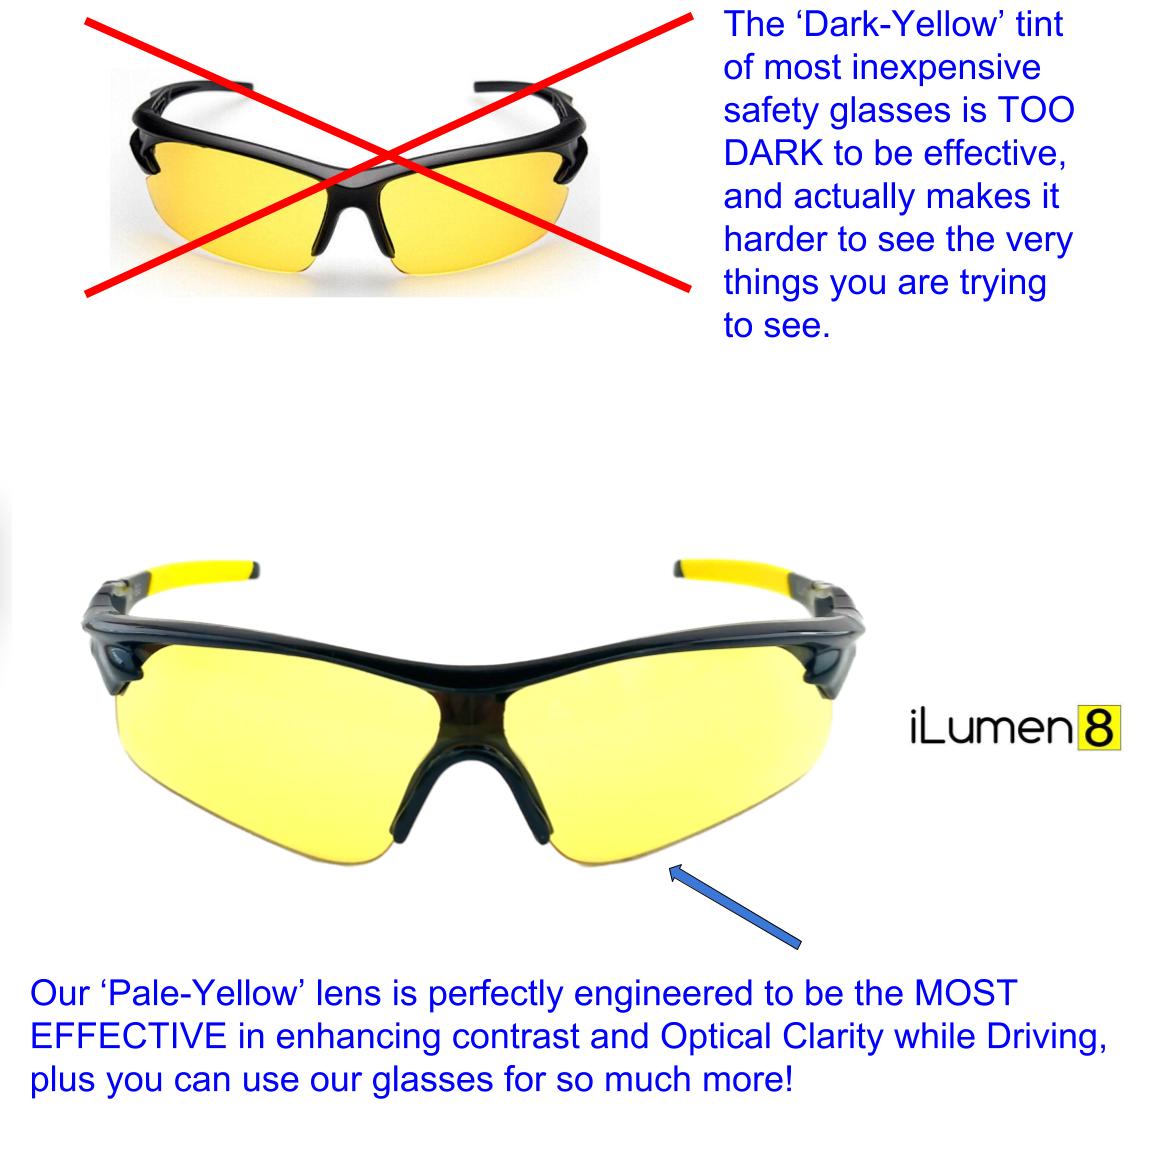 Night Vision Glasses for Driving, Anti-Glare Polarized, Night Driving  Glasses for Men & Women, Yellow-Tinted with Hard Case (Night Vision/Black)